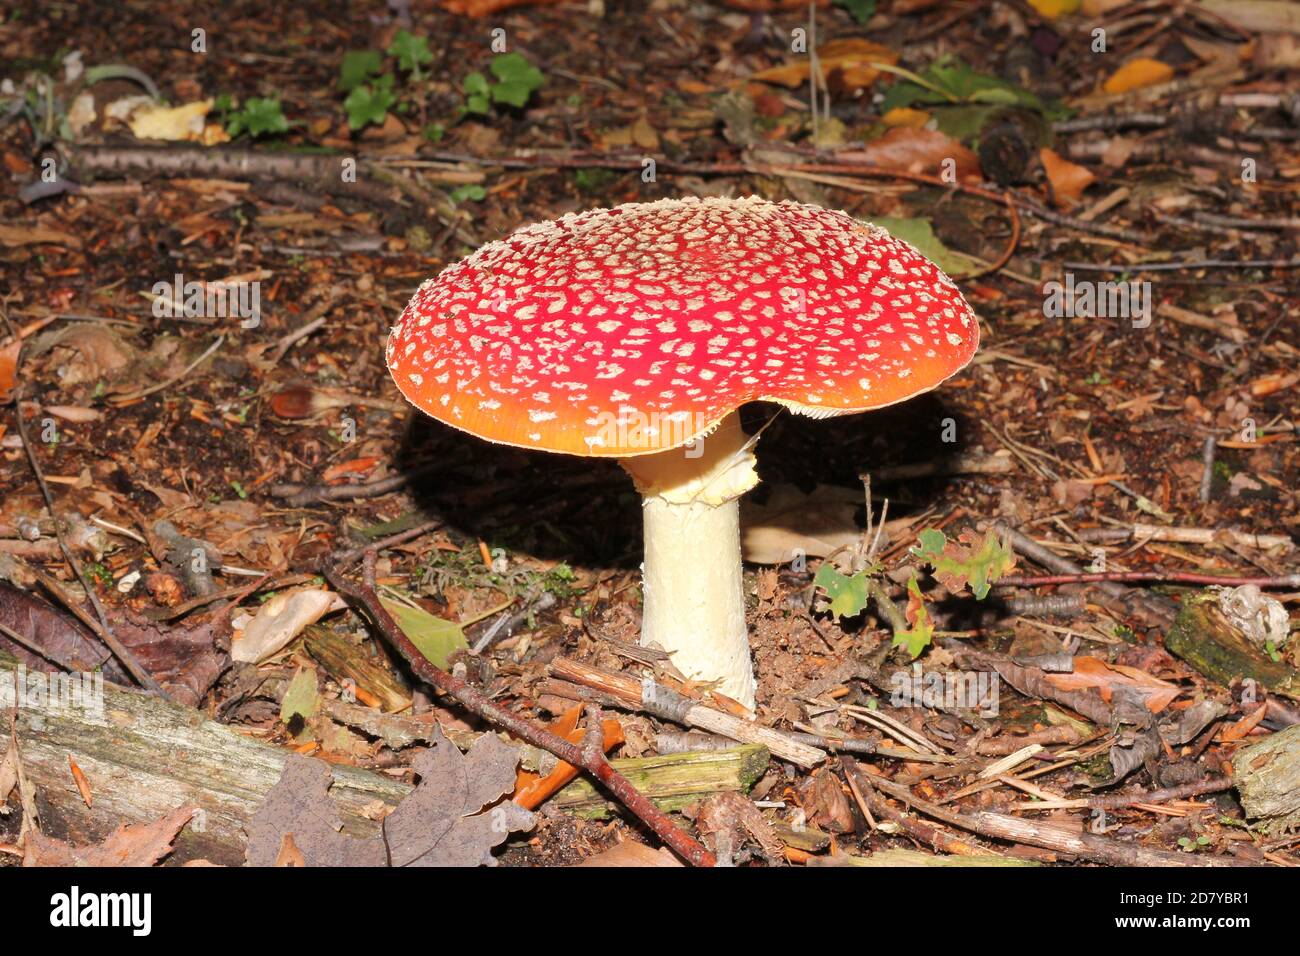 Red Fly Agaric, Amanita muscaria, growing in a forest near Marl-Sinsen, Germany Stock Photo